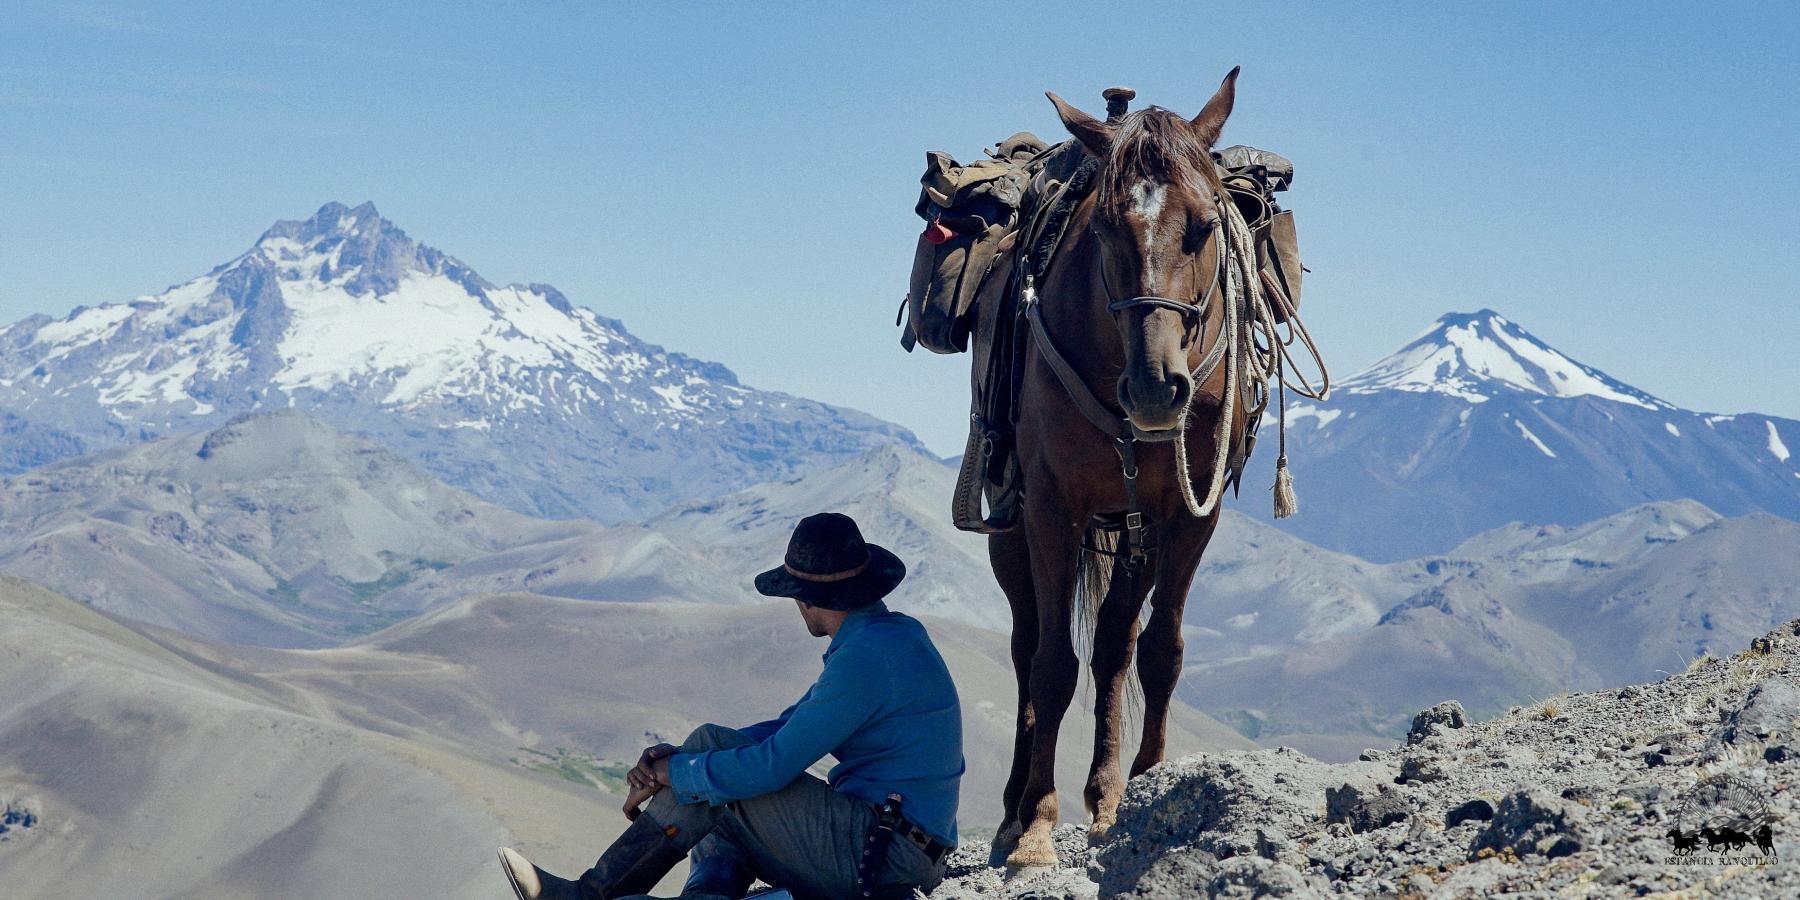 Man sitting next to horse overlooking snow capped mountains in Patagonia